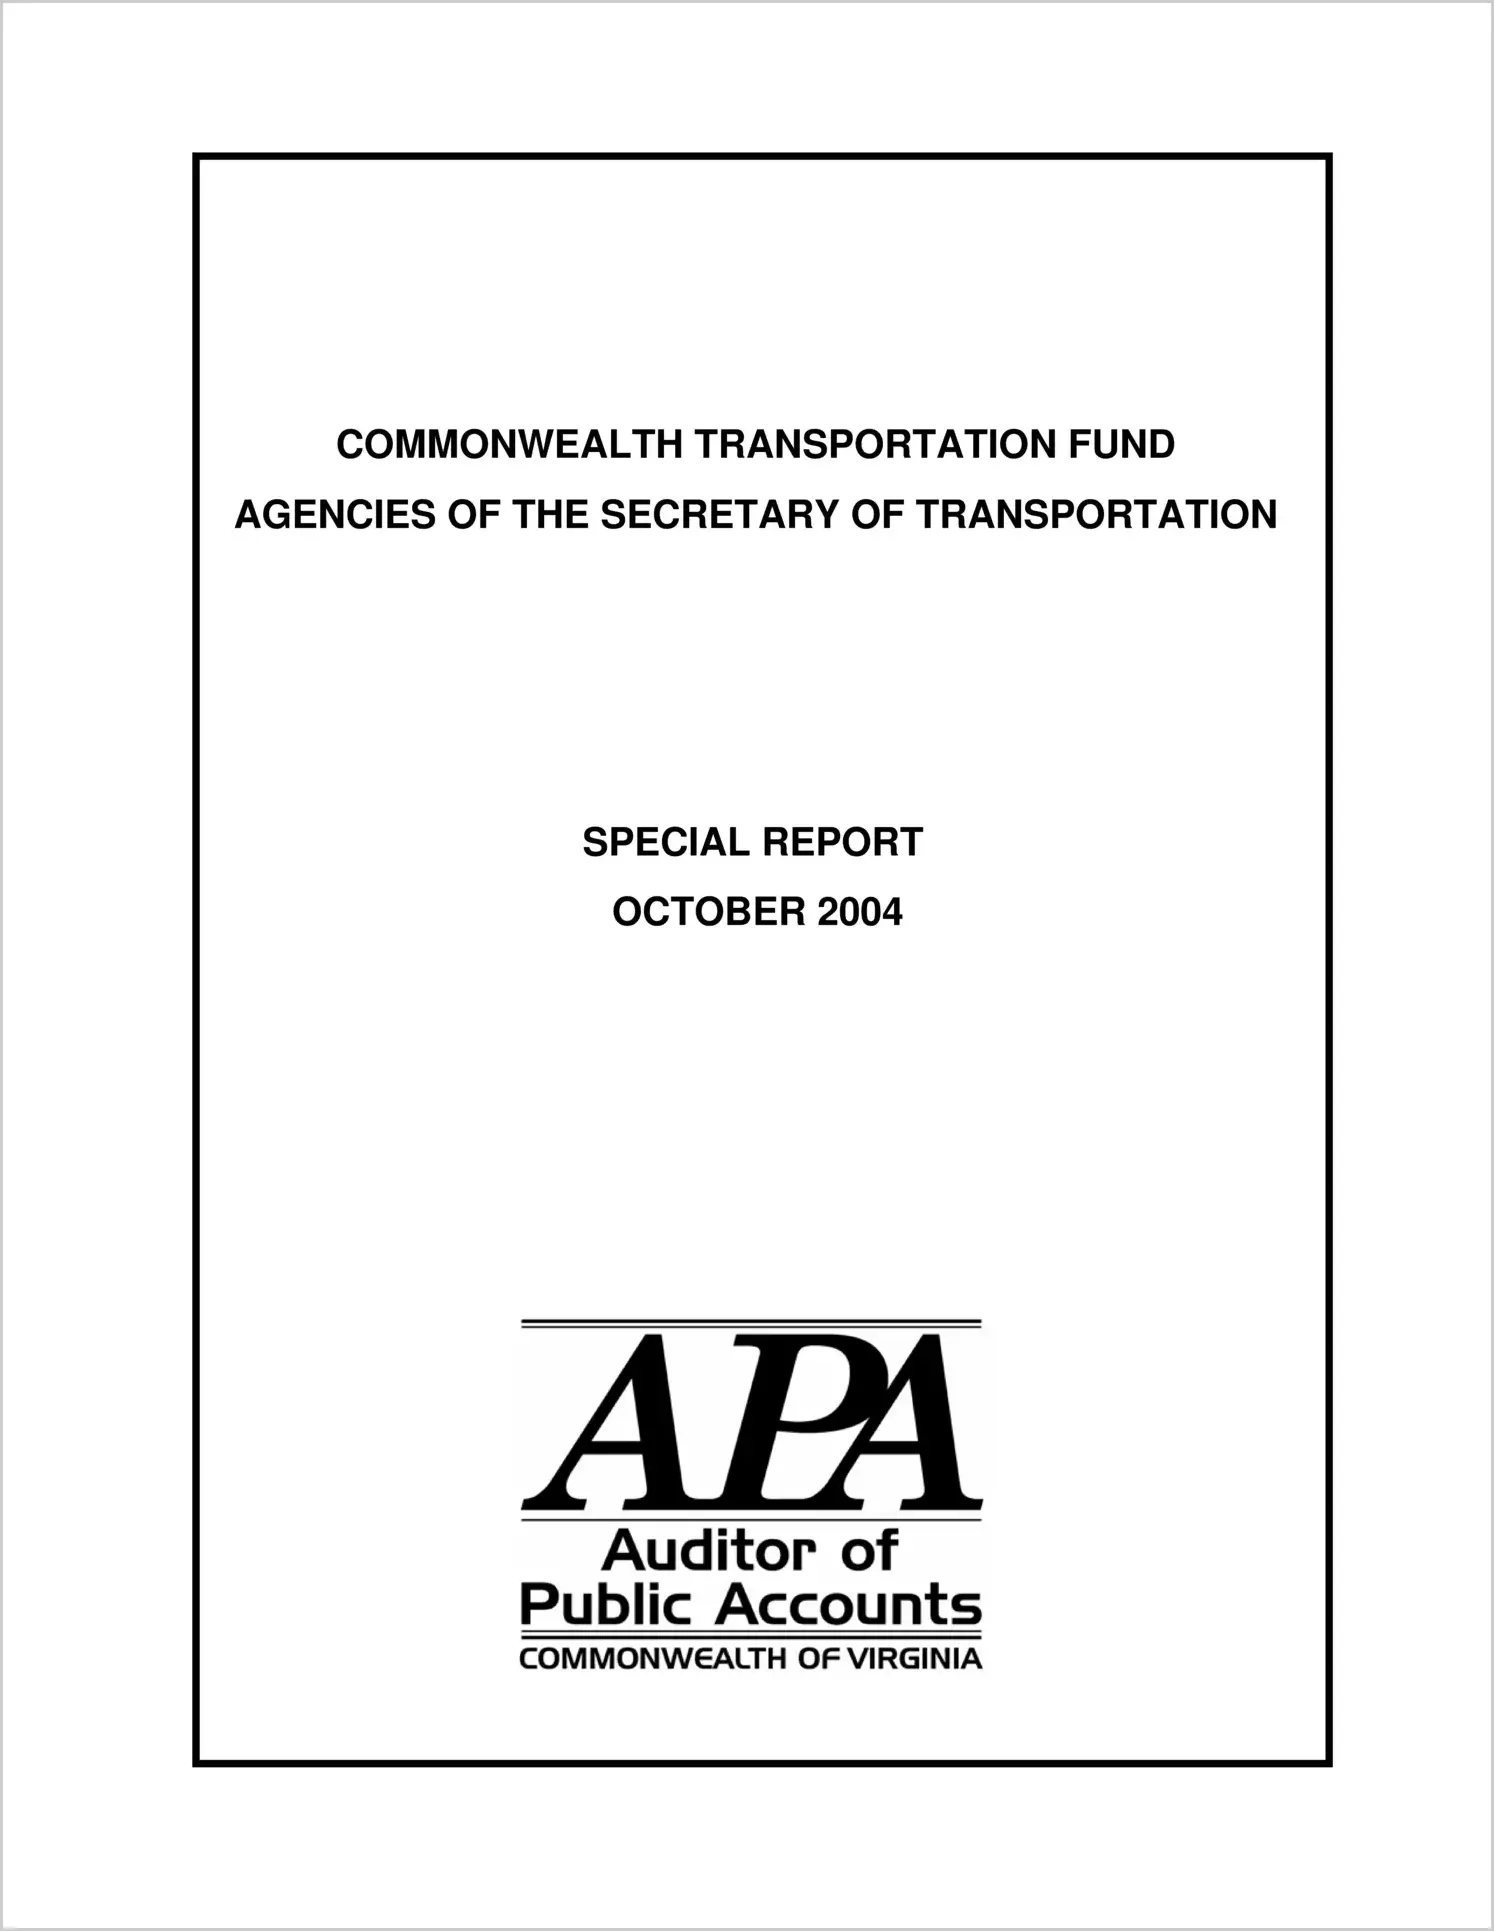 Special ReportCommonwealth Transportation Fund - Agencies of the Secretary Of Transportation (Report Date: October 2004)